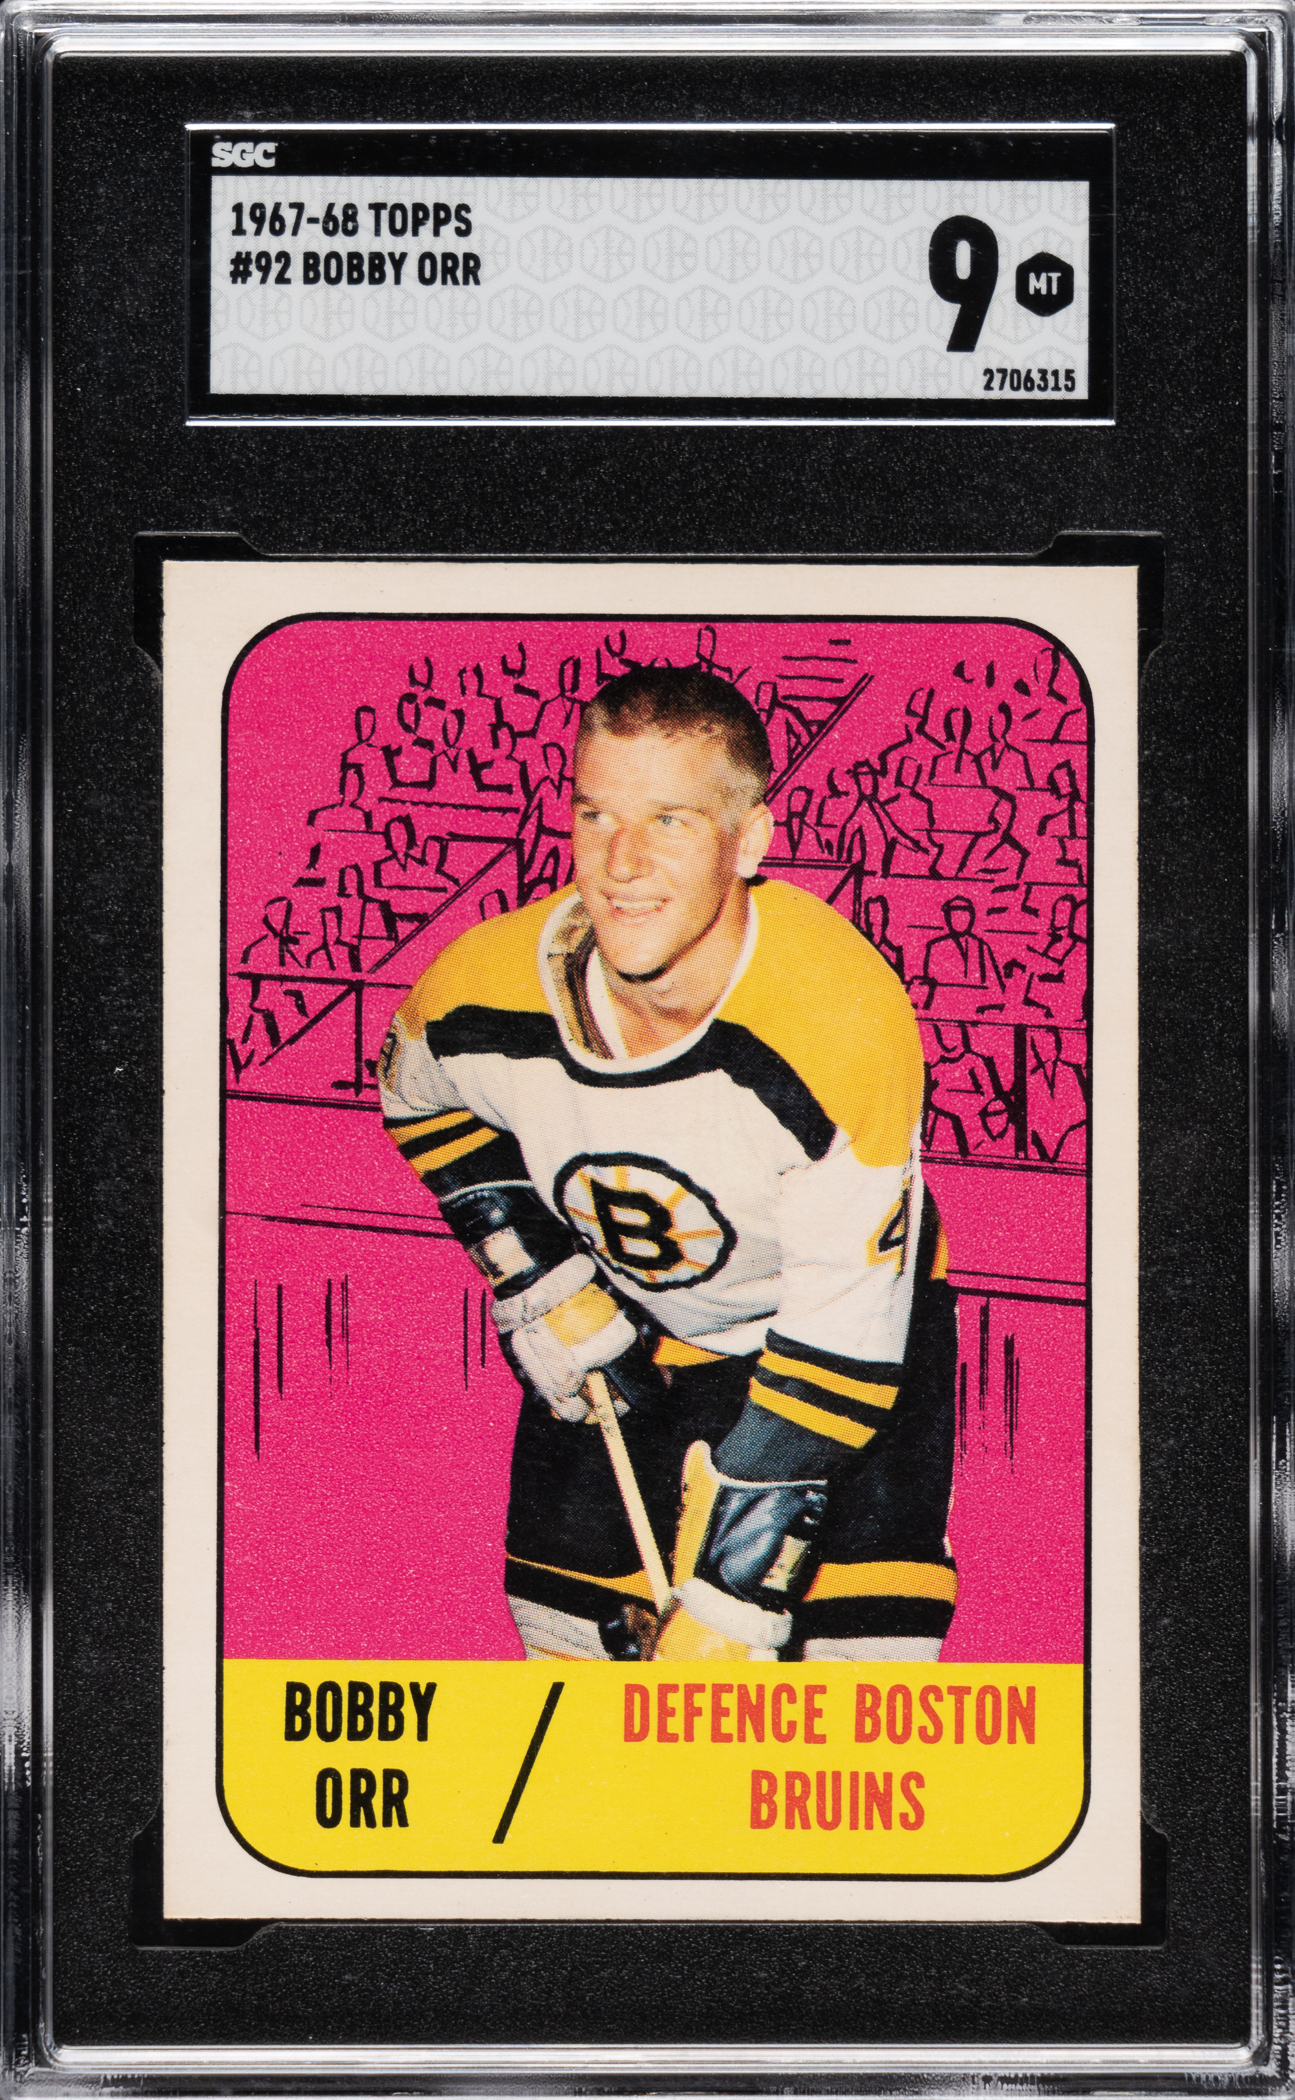 A 1967-1968 Topps Hockey #92 Bobby Orr SGC MINT 9 sold for $5,520, which was an SGC record for the card in this grade